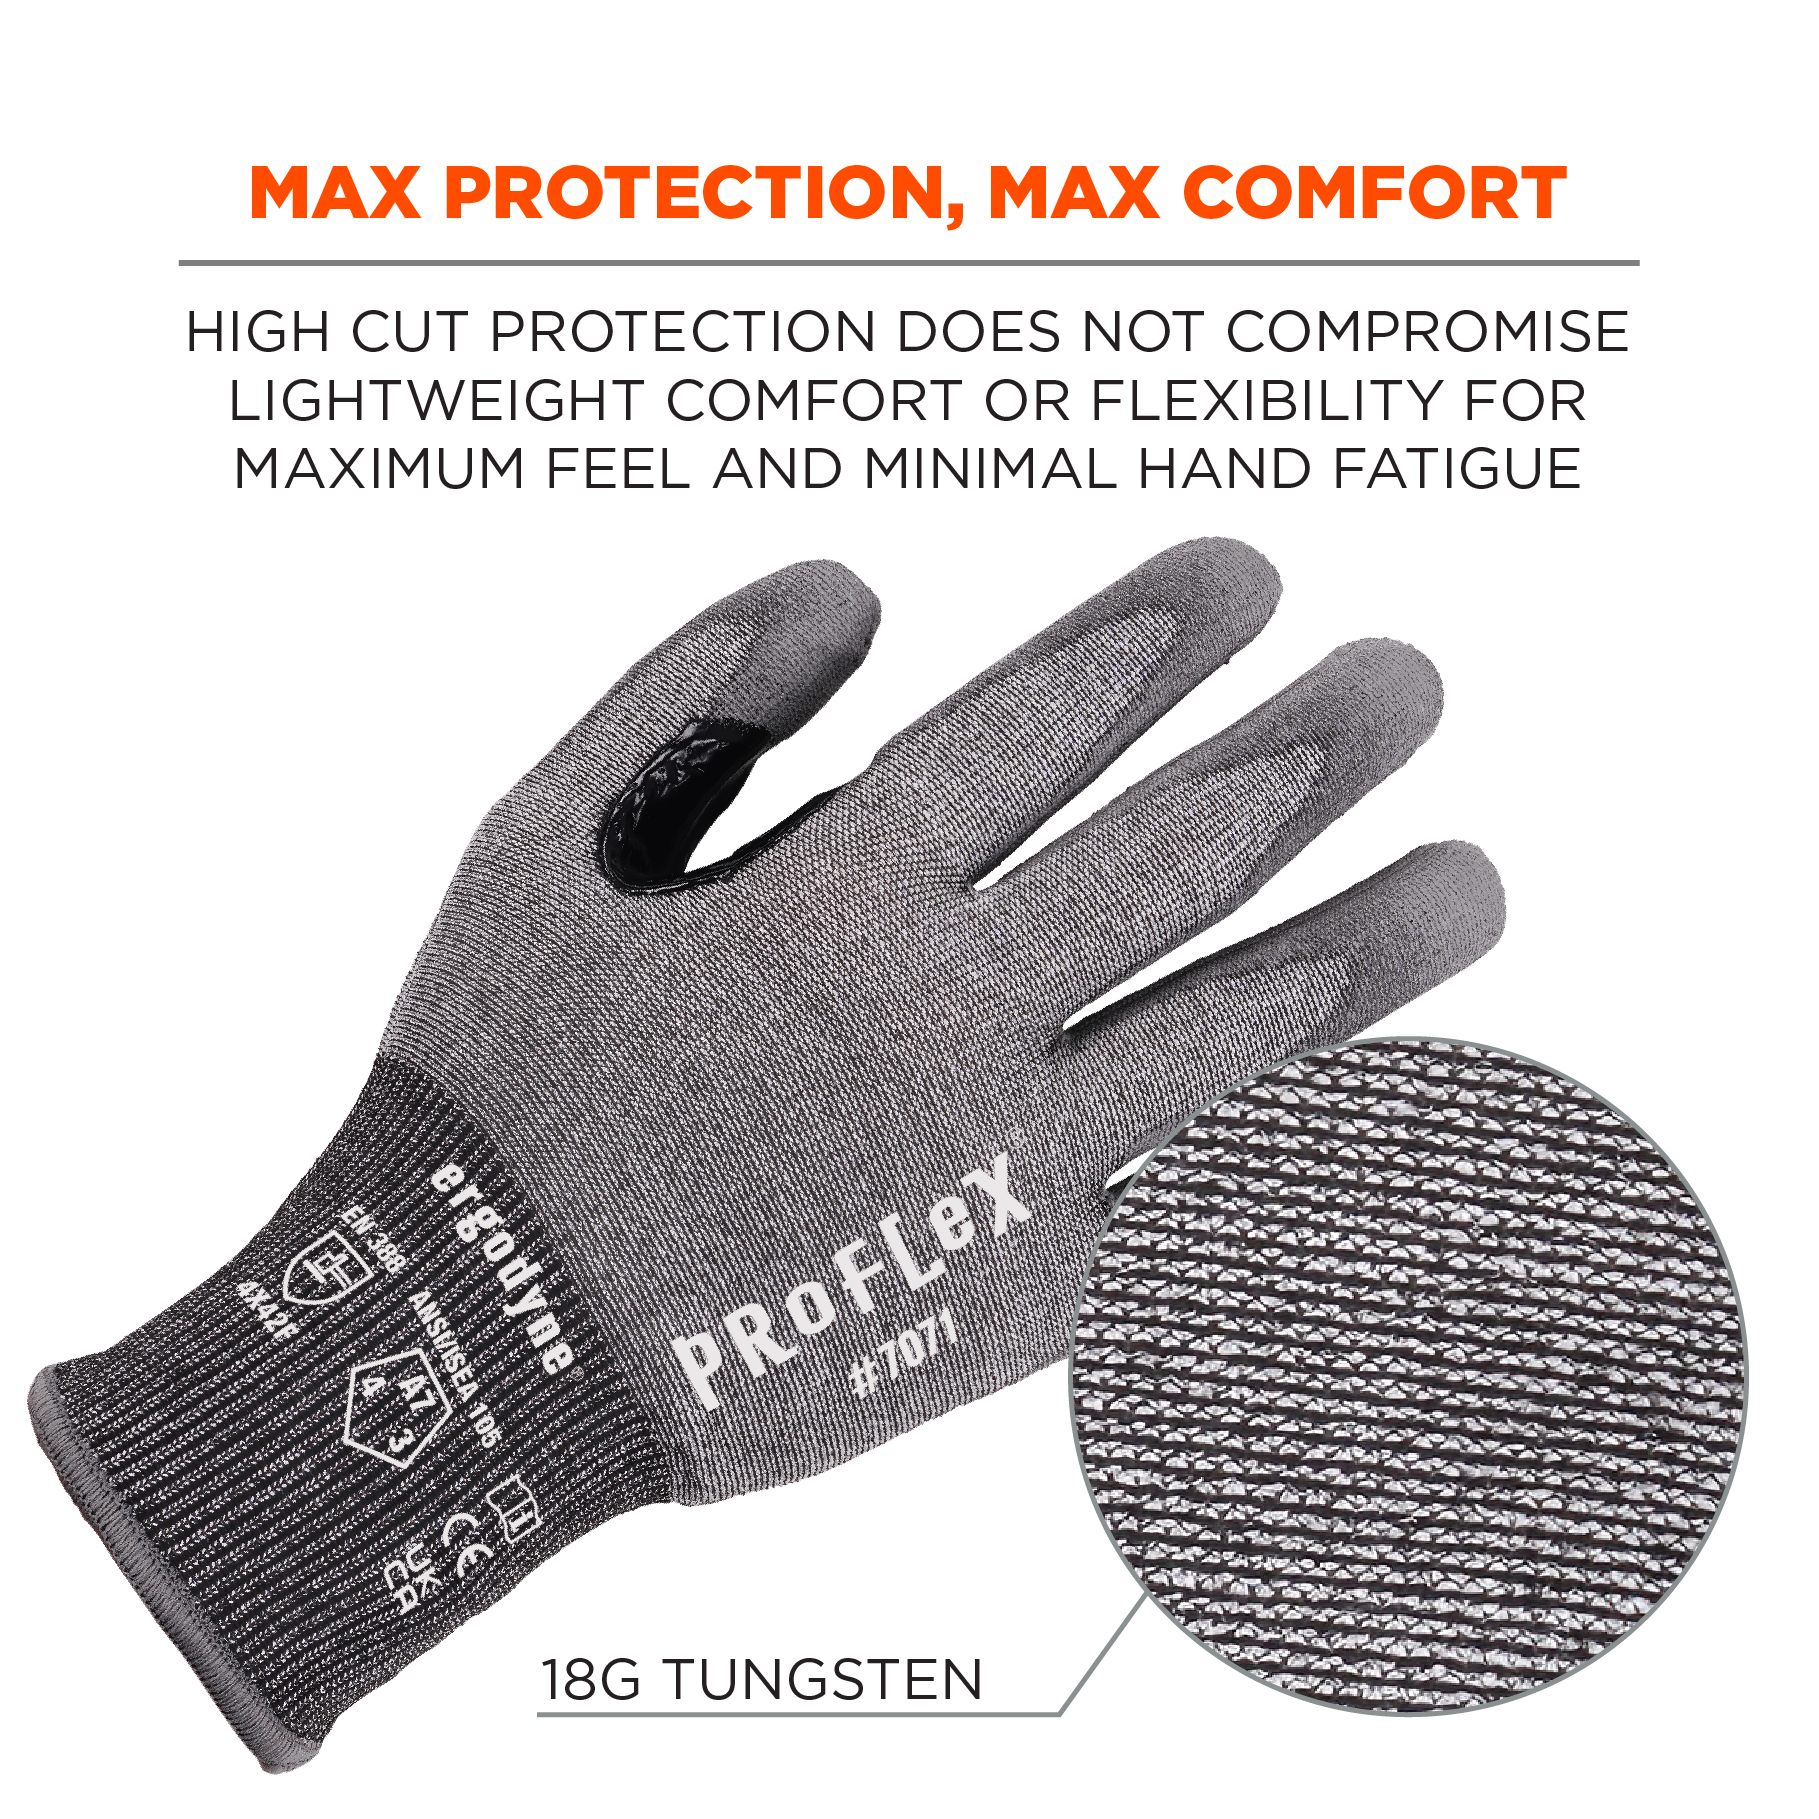 https://www.ergodyne.com/sites/default/files/product-images/18072-7071-ansi-a7-pu-coated-cr-gloves-gray-max-protection-and-comfort_1.jpg